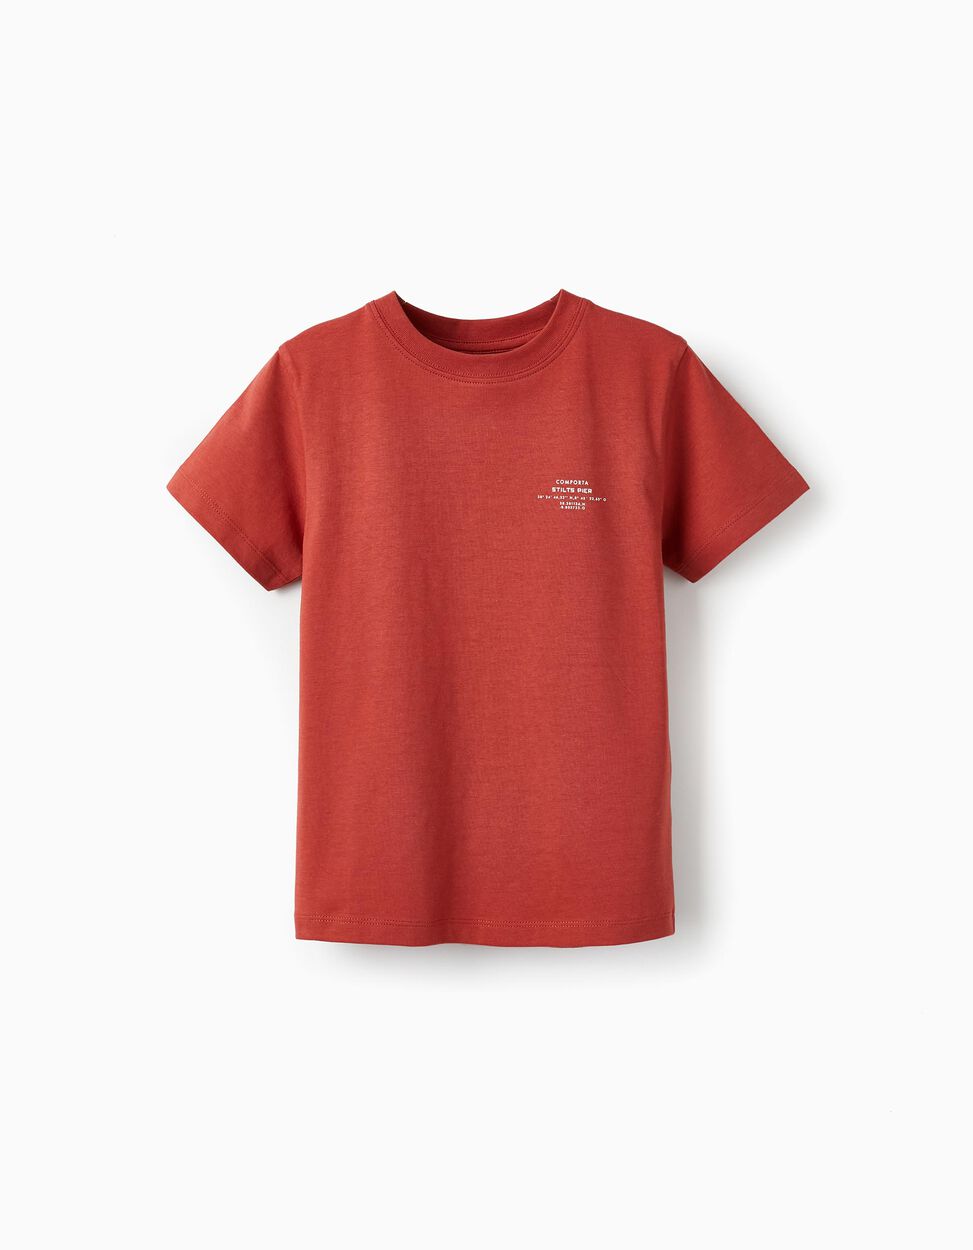 Buy Online Cotton T-Shirt for Boys 'Comporta', Brick Red